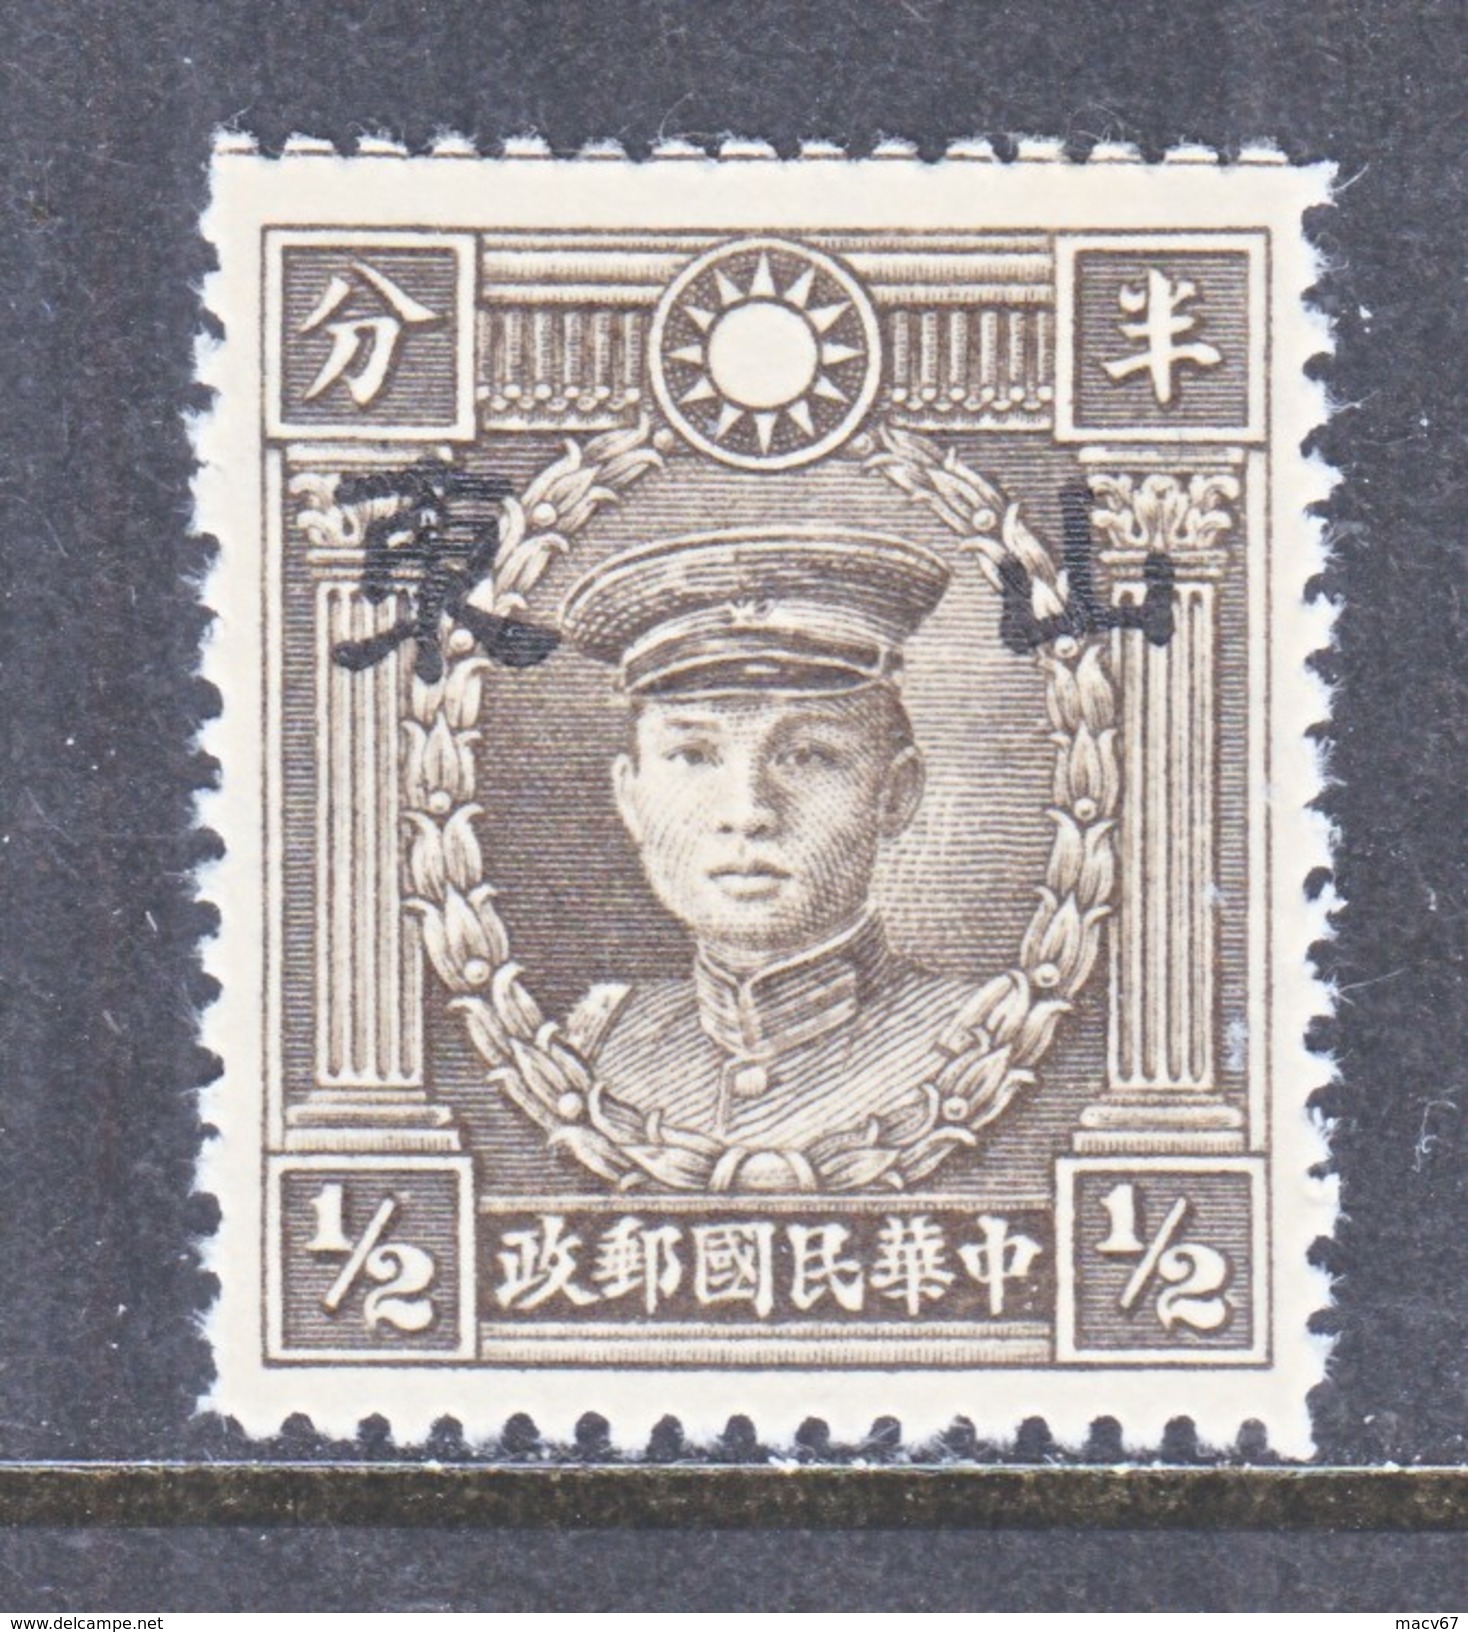 Old China Japanese Occupation  SHANTUNG  6N 6  Type II   * - 1941-45 Northern China